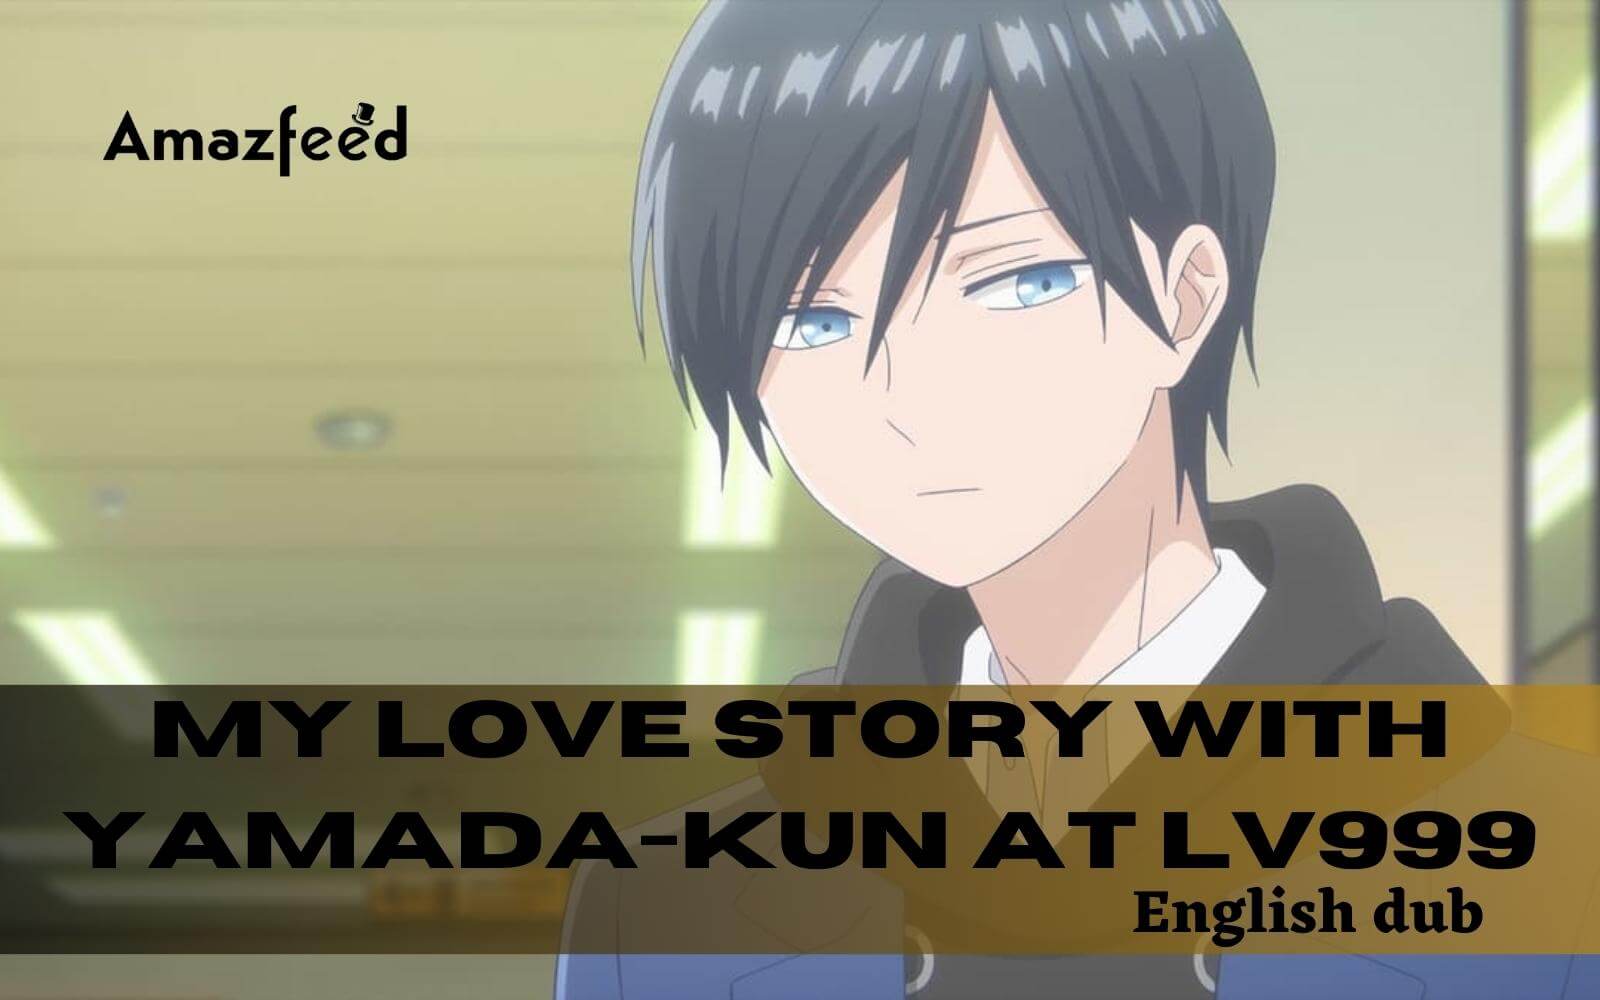 Love After World Domination (English Dub) I Love You! - Watch on